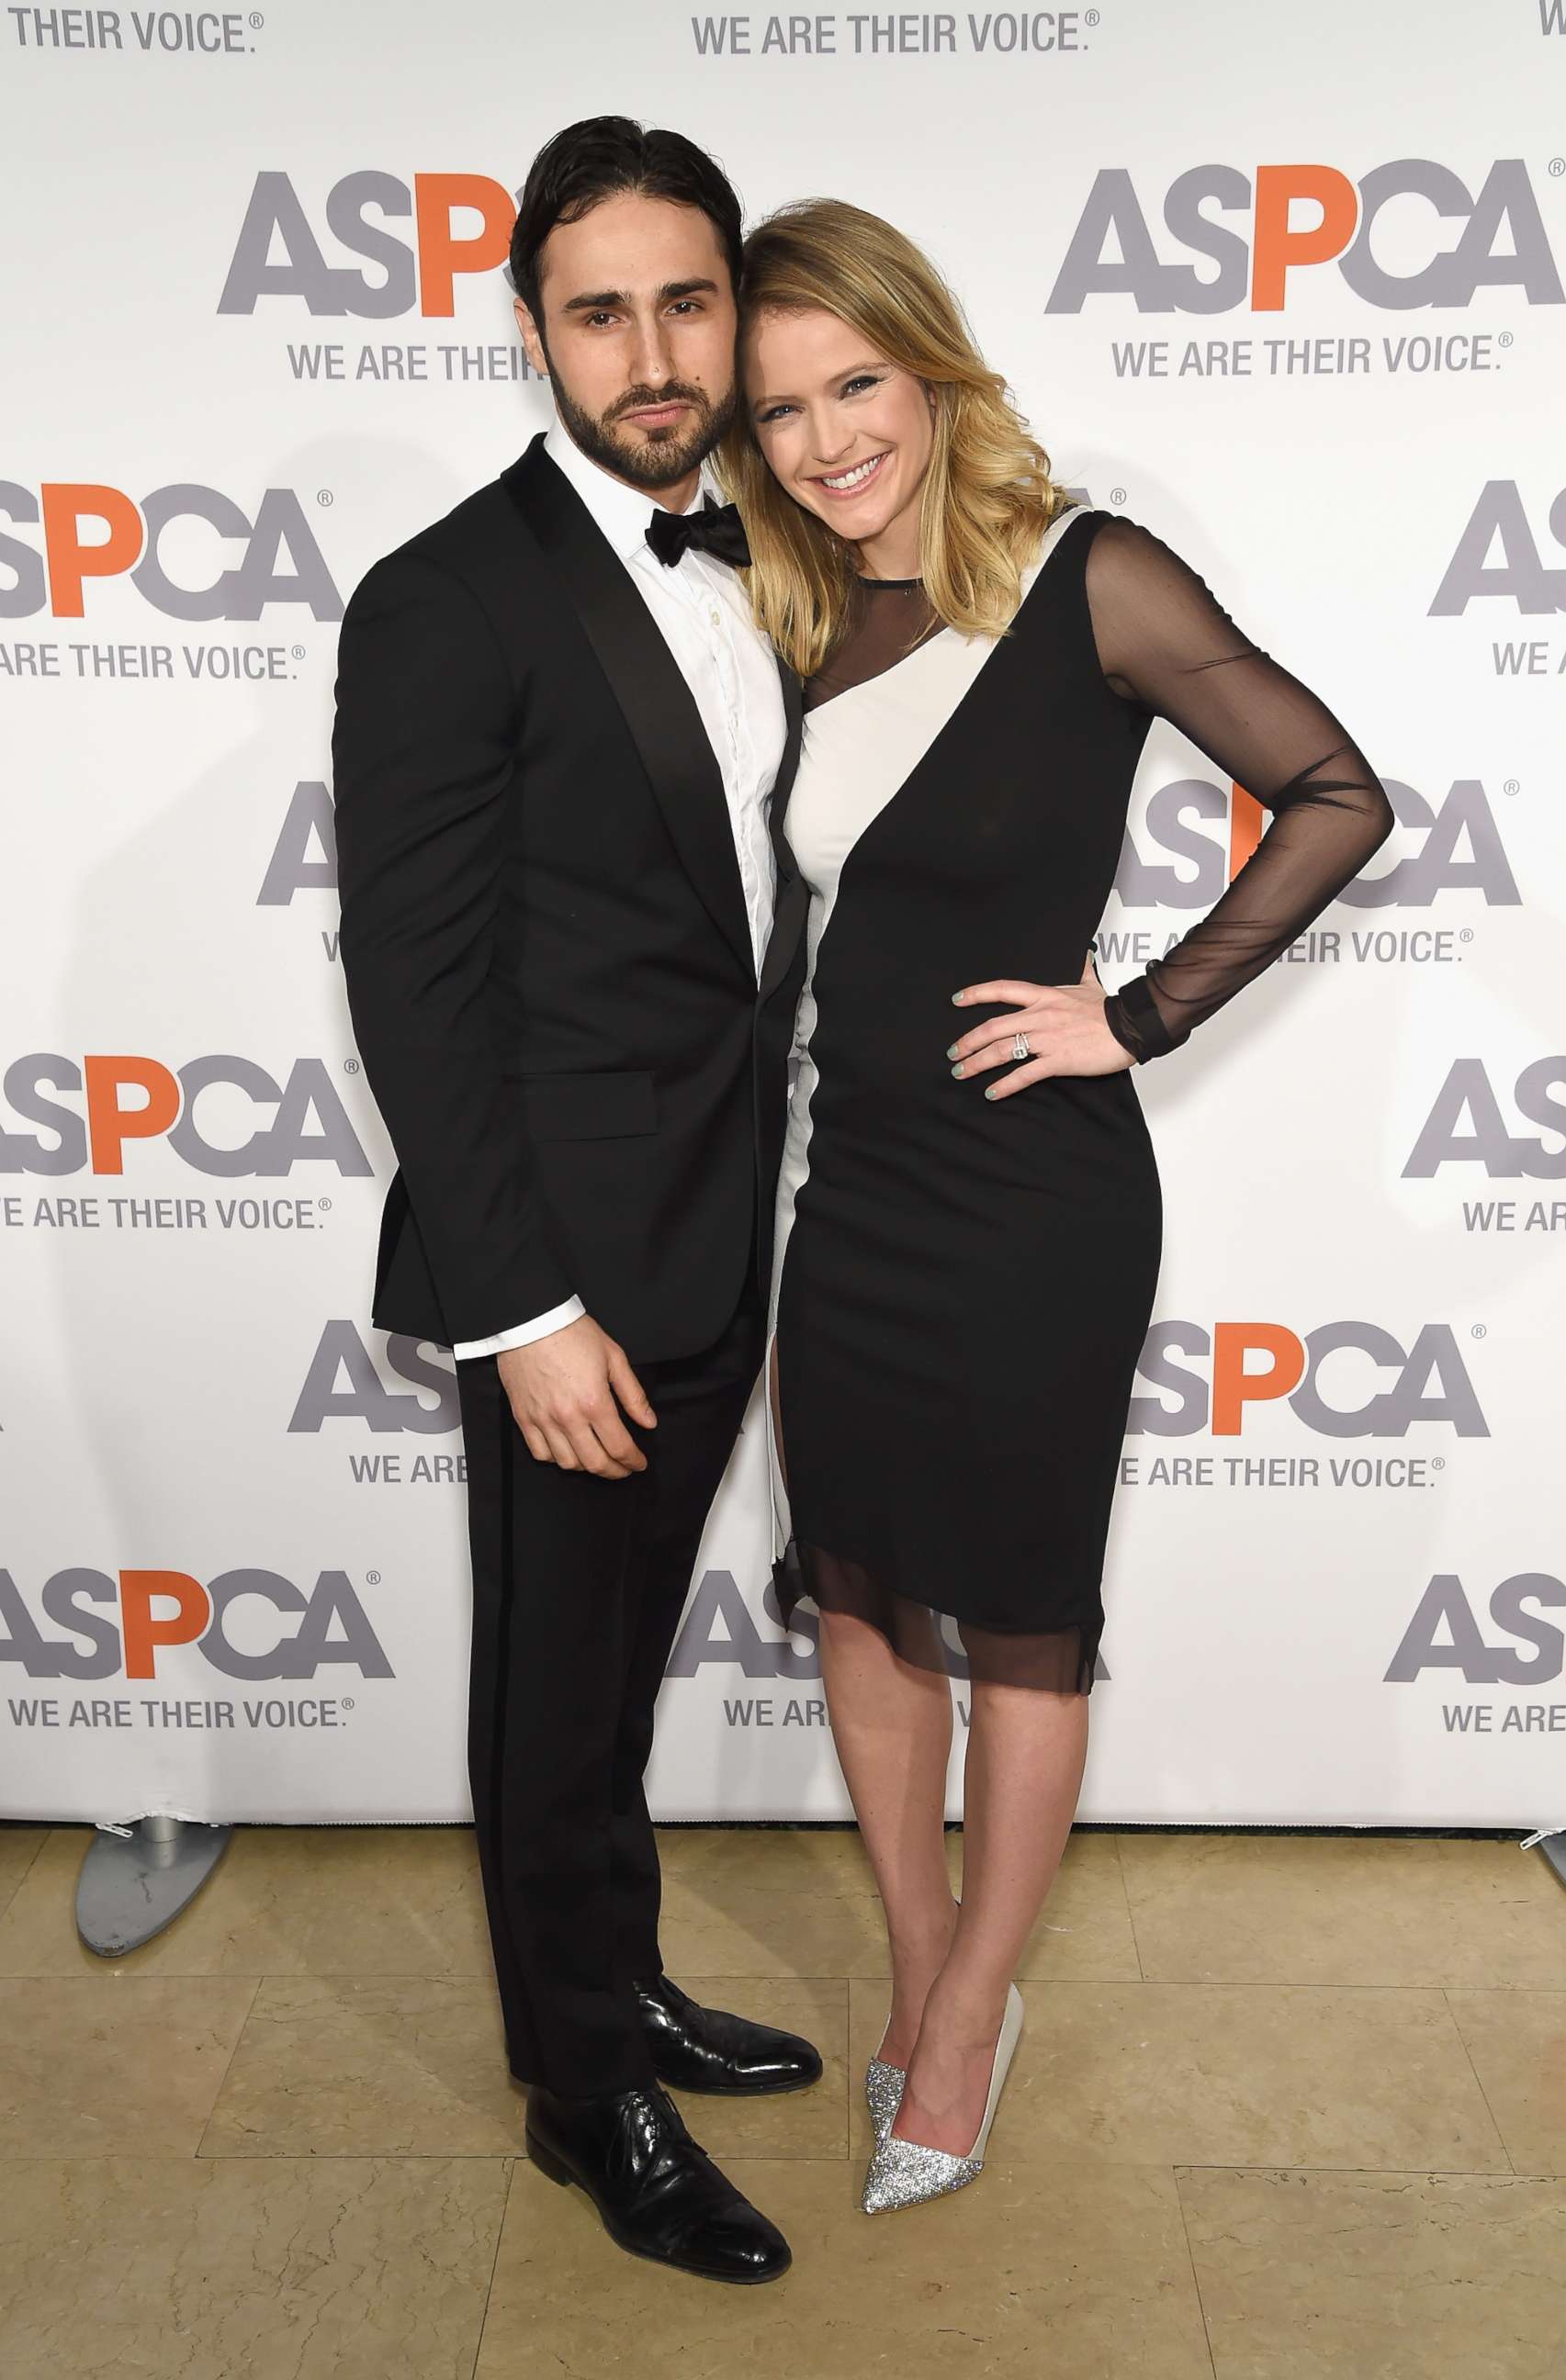 PHOTO: Max Shifrin (L) and Sara Haines attend ASPCA'S 18th Annual Bergh Ball honoring Edie Falco and Hilary Swank at The Plaza Hotel, April 9, 2015 in New York City. 